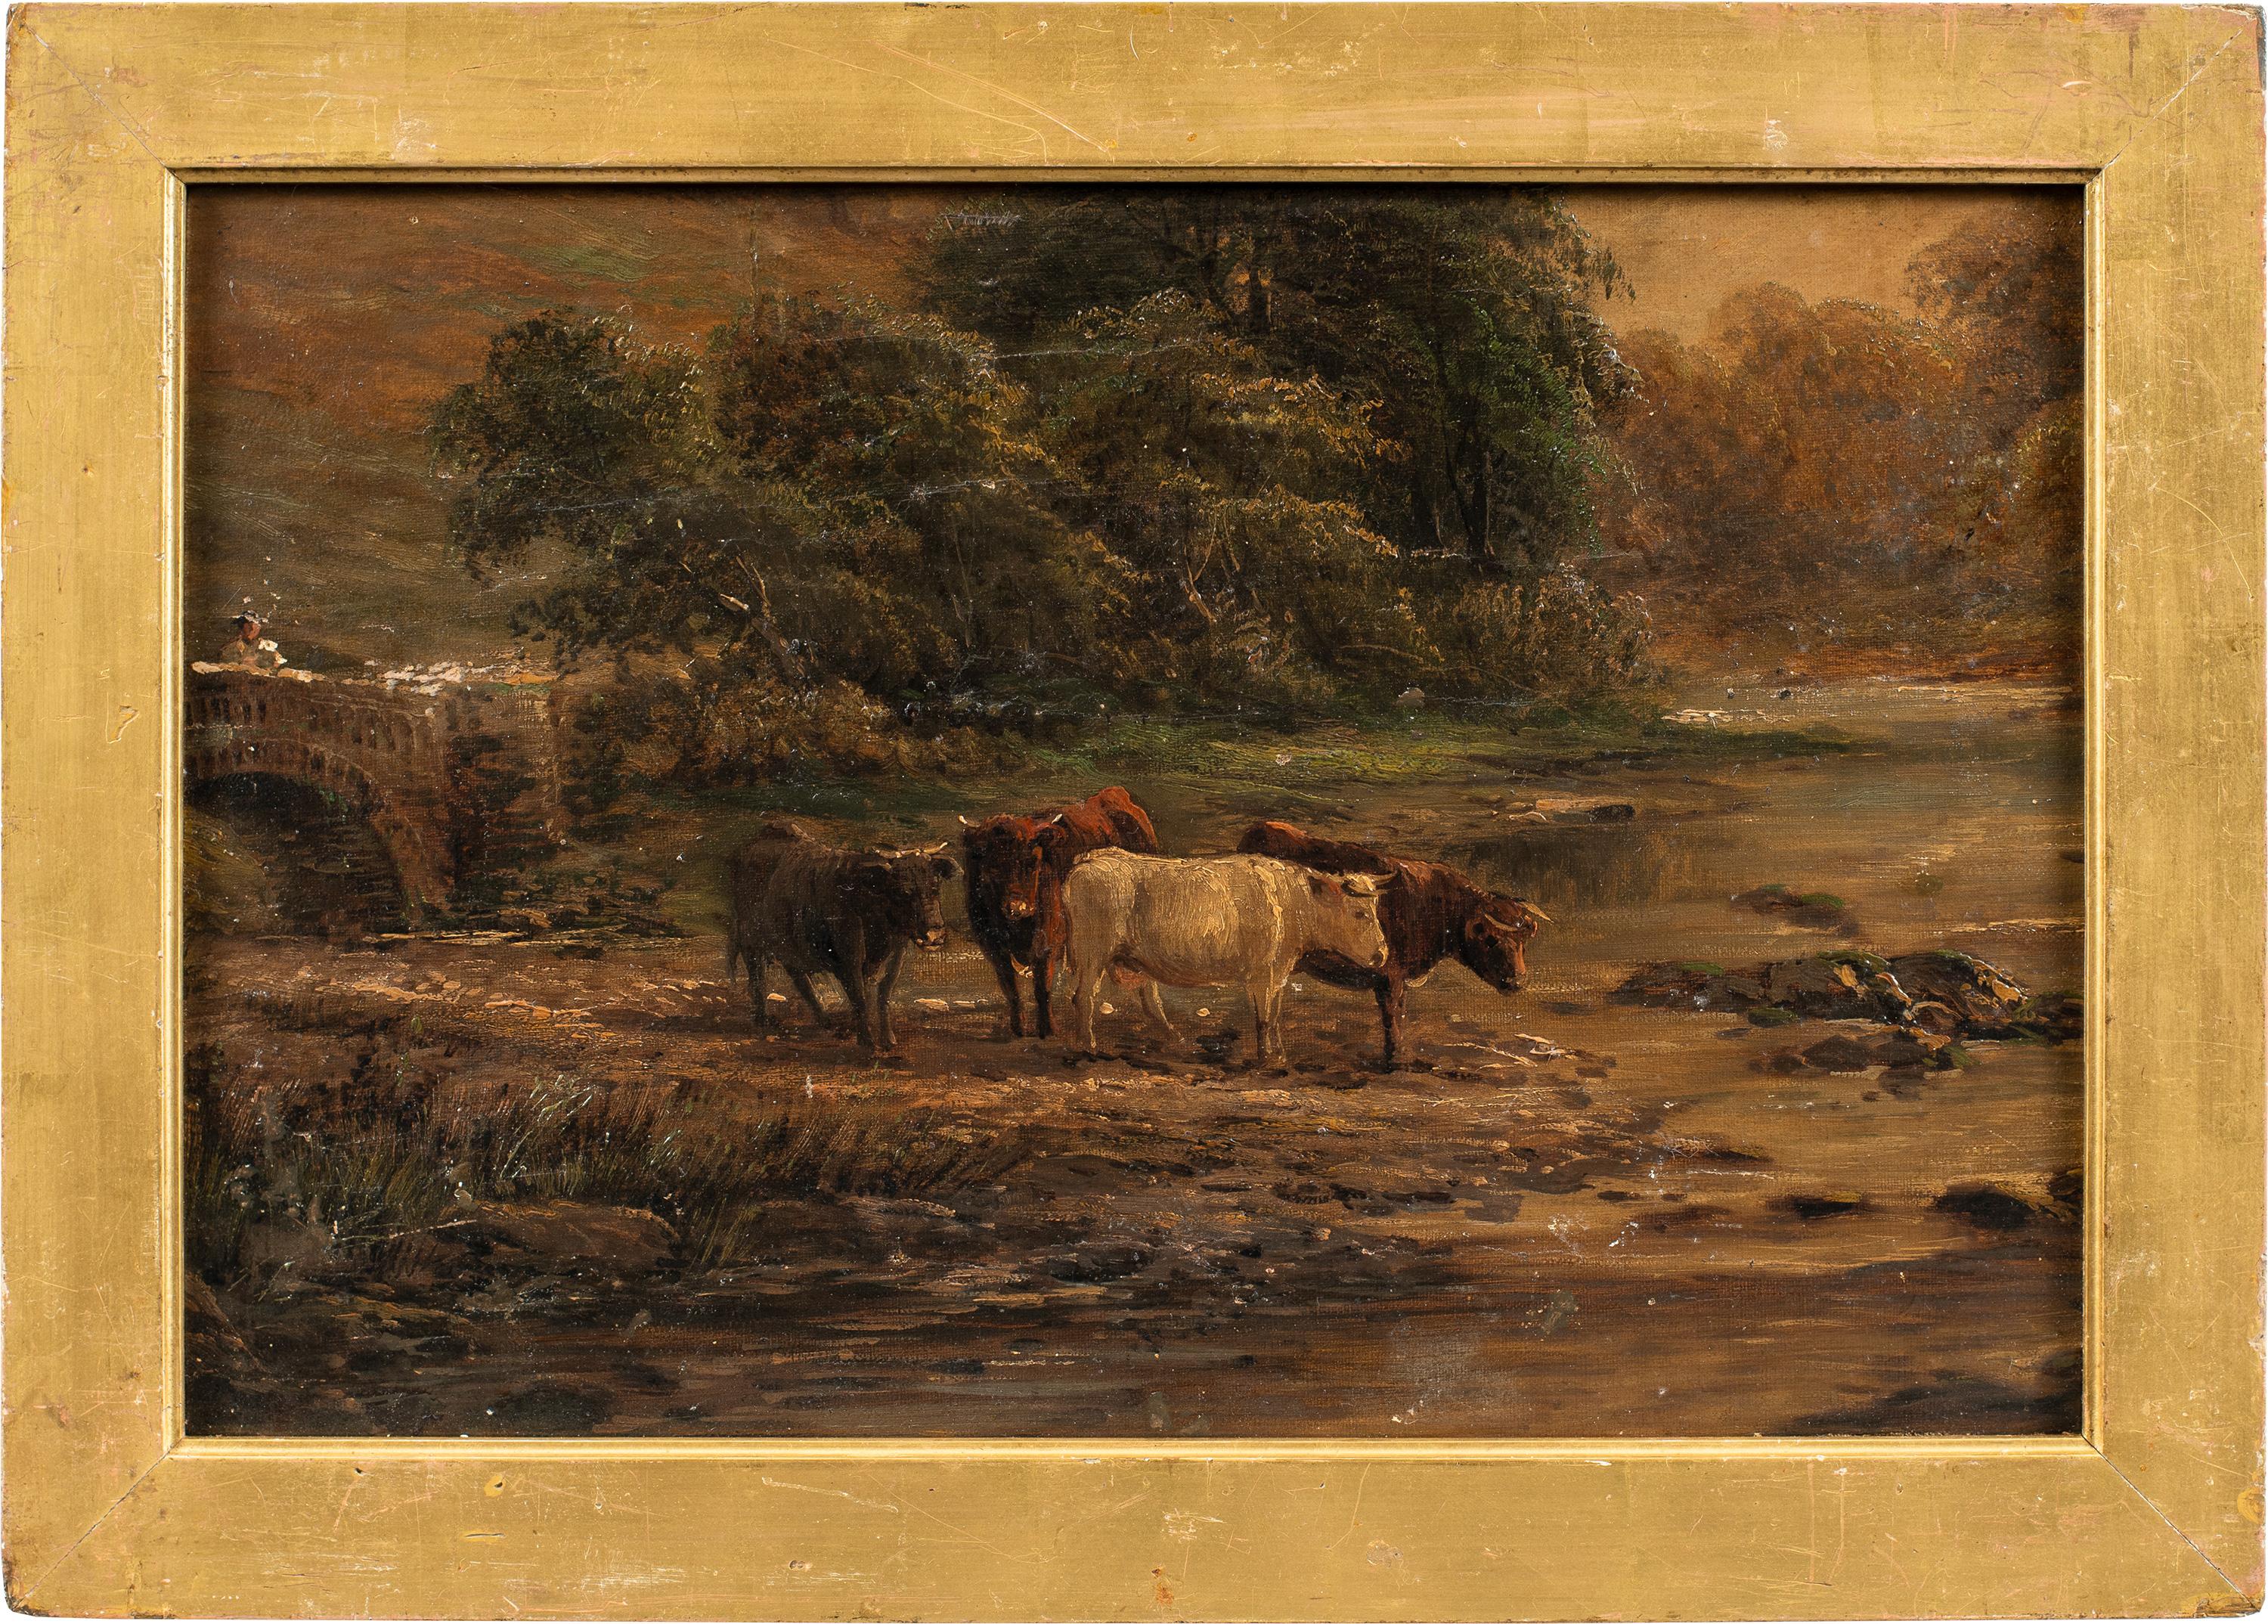 Unknown Figurative Painting - Naturalistic British painter - 19th century landscape painting - Bulls at river 